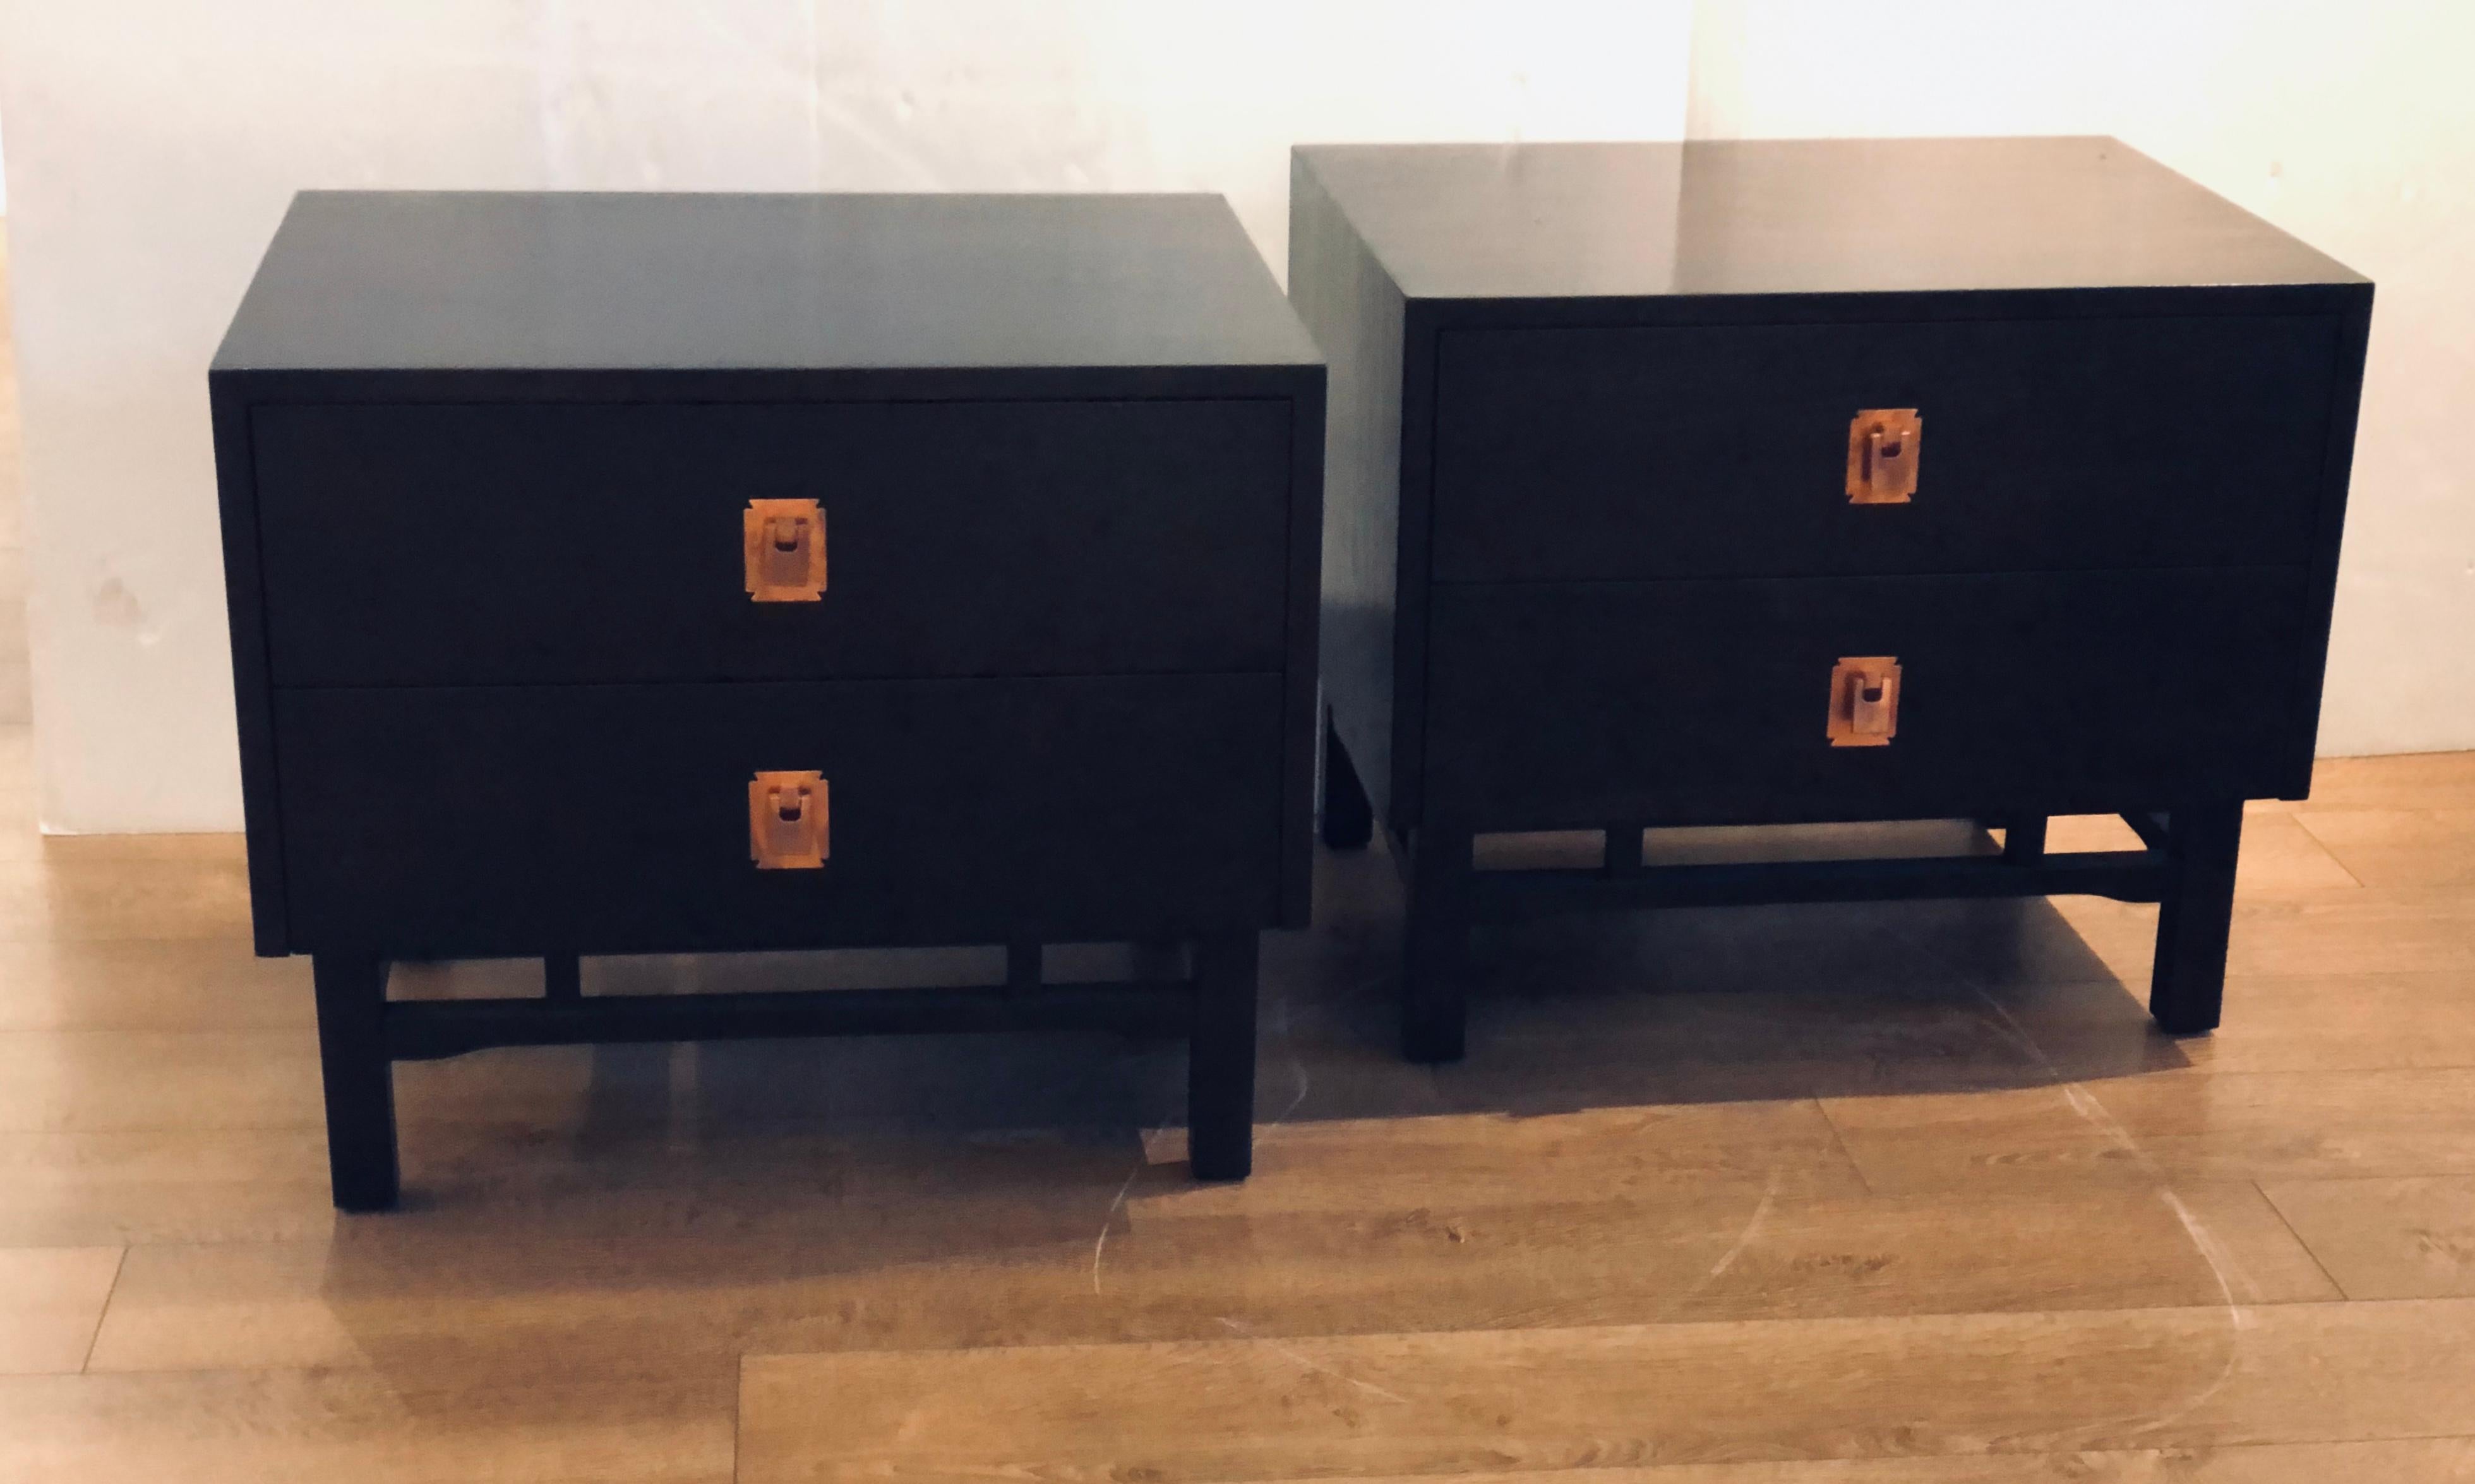 Great pair of rare nightstands design by California company Kalpe, circa 1970s, solid Mahogany frame in a dark chocolate finish with polished copper handles, minimalist look freshly refinished a very good looking set with deep drawers. Refinished in